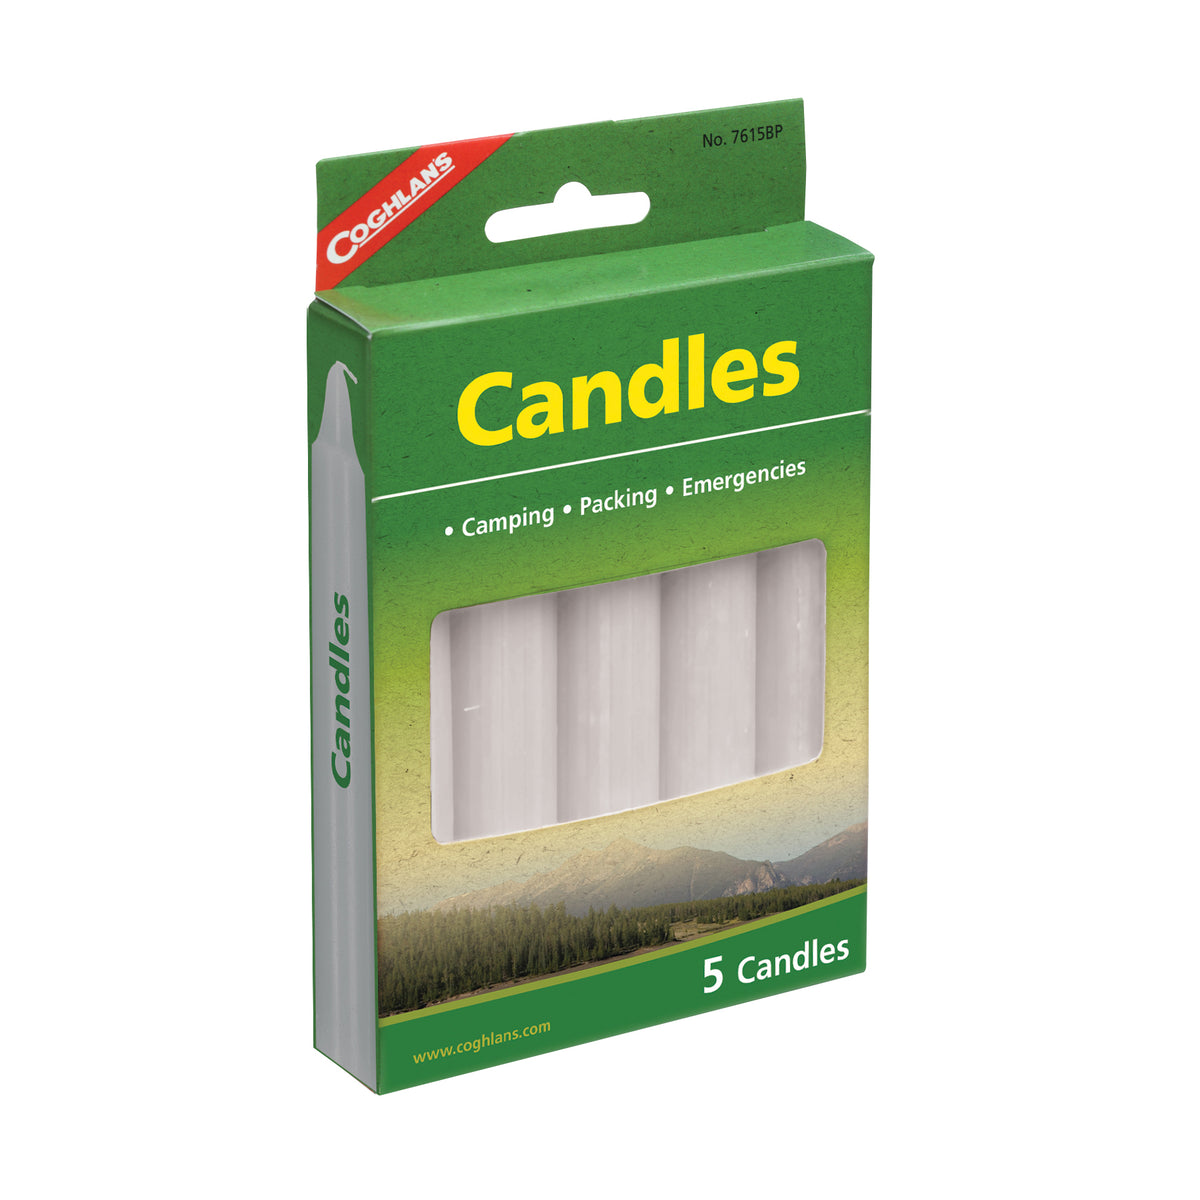 Coghlan's 7615BP Candles, 5 Hr, 3/4" x 5", Carded/ 5